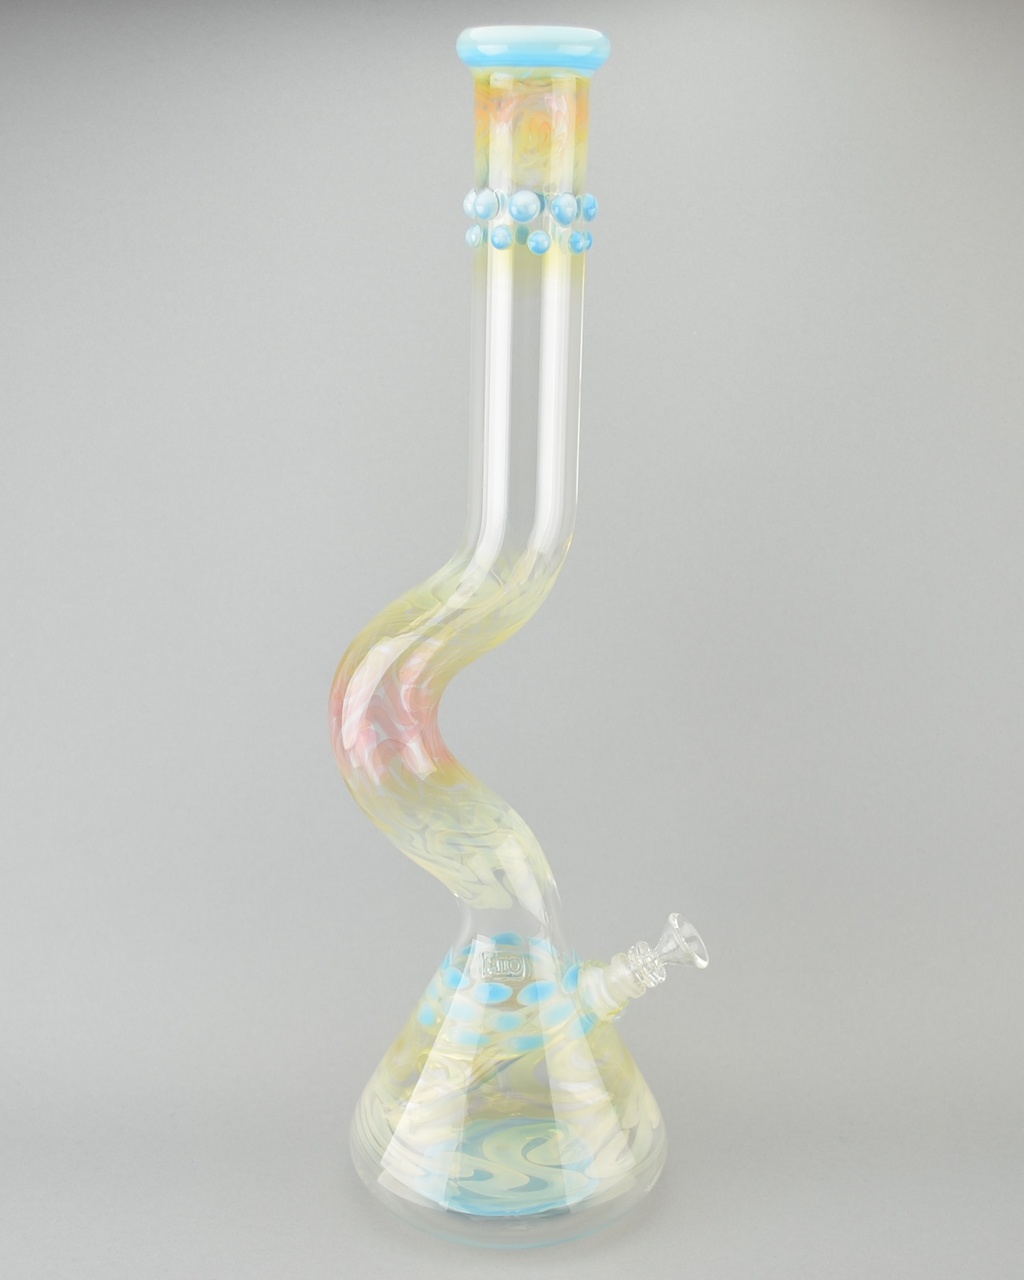 Formula 420 Cleaner - Zong Glass